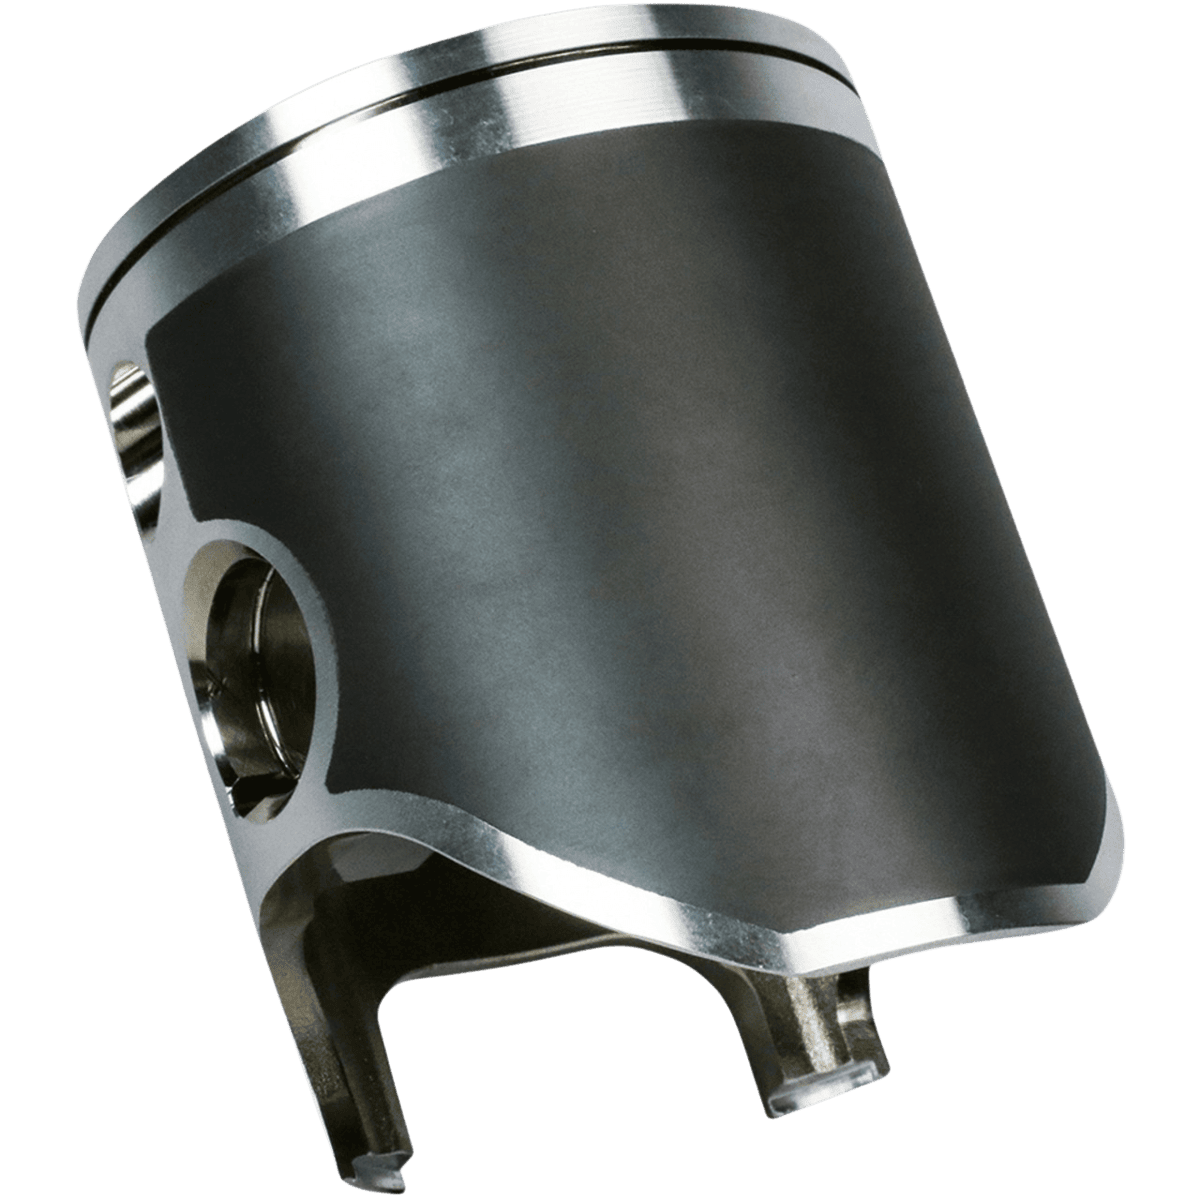 Best 1992 WR125 Piston Kit for Two strokes